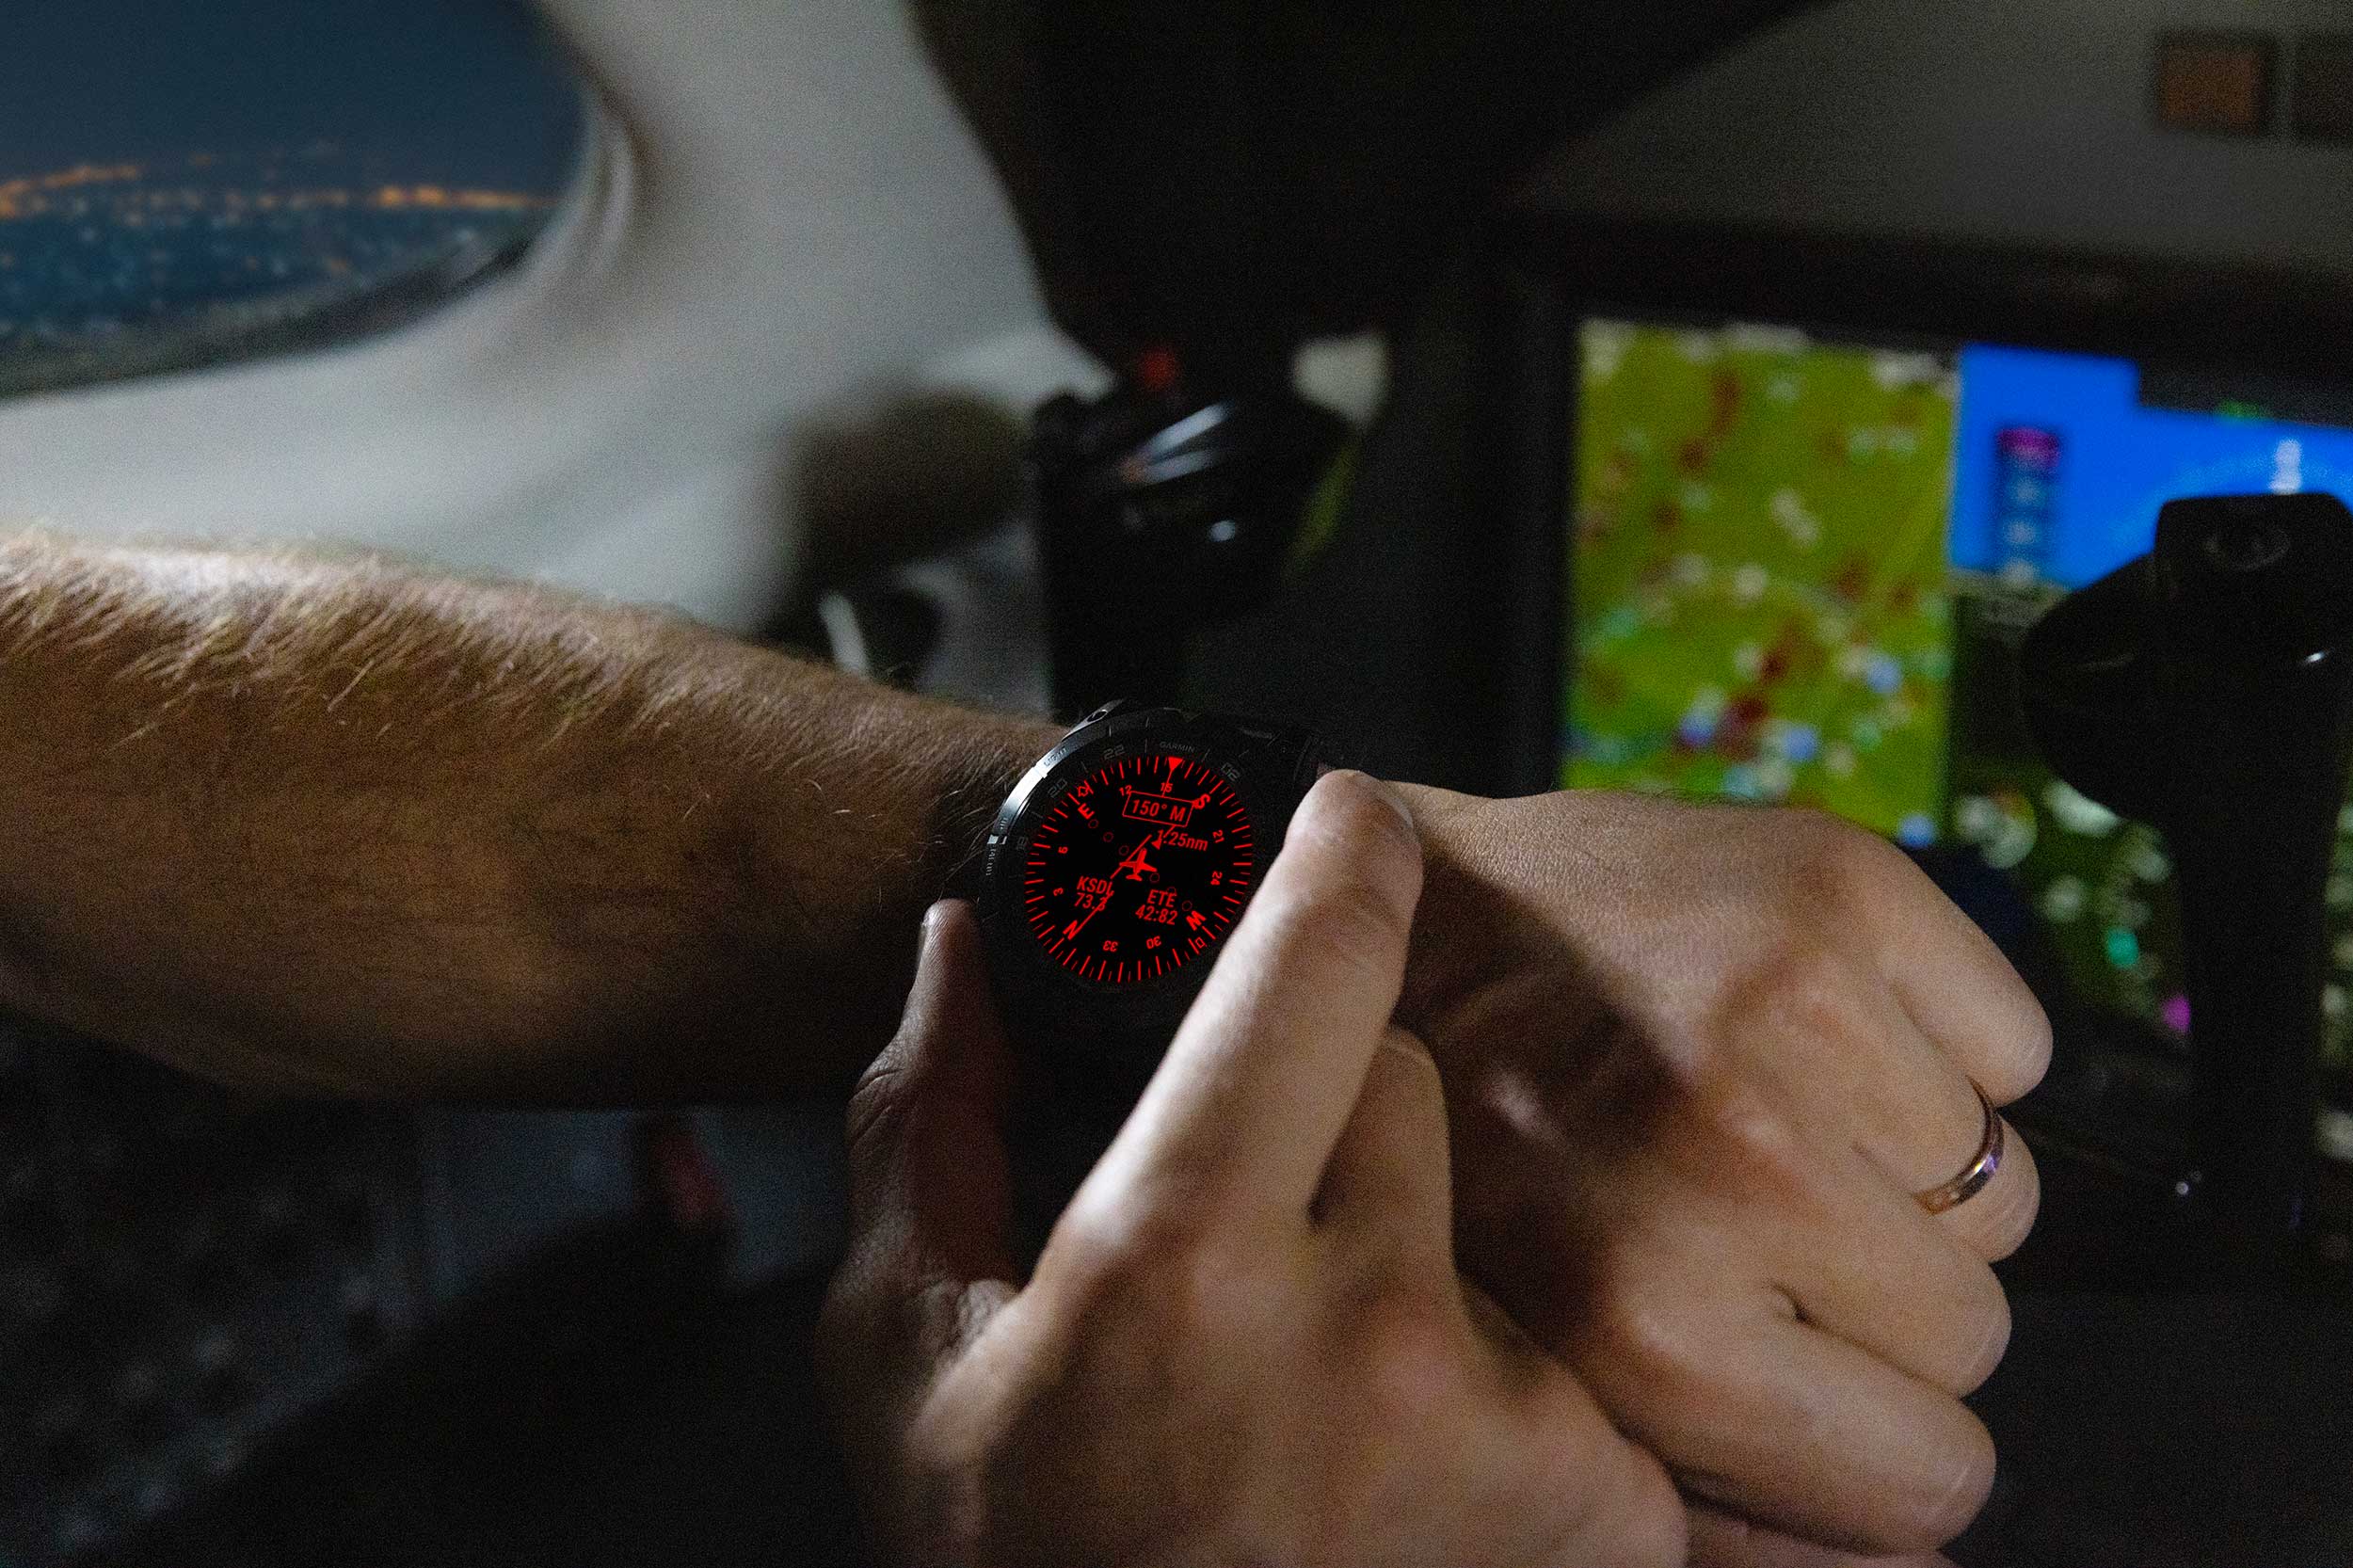 Garmin watch in red shift mode to preserve night vision